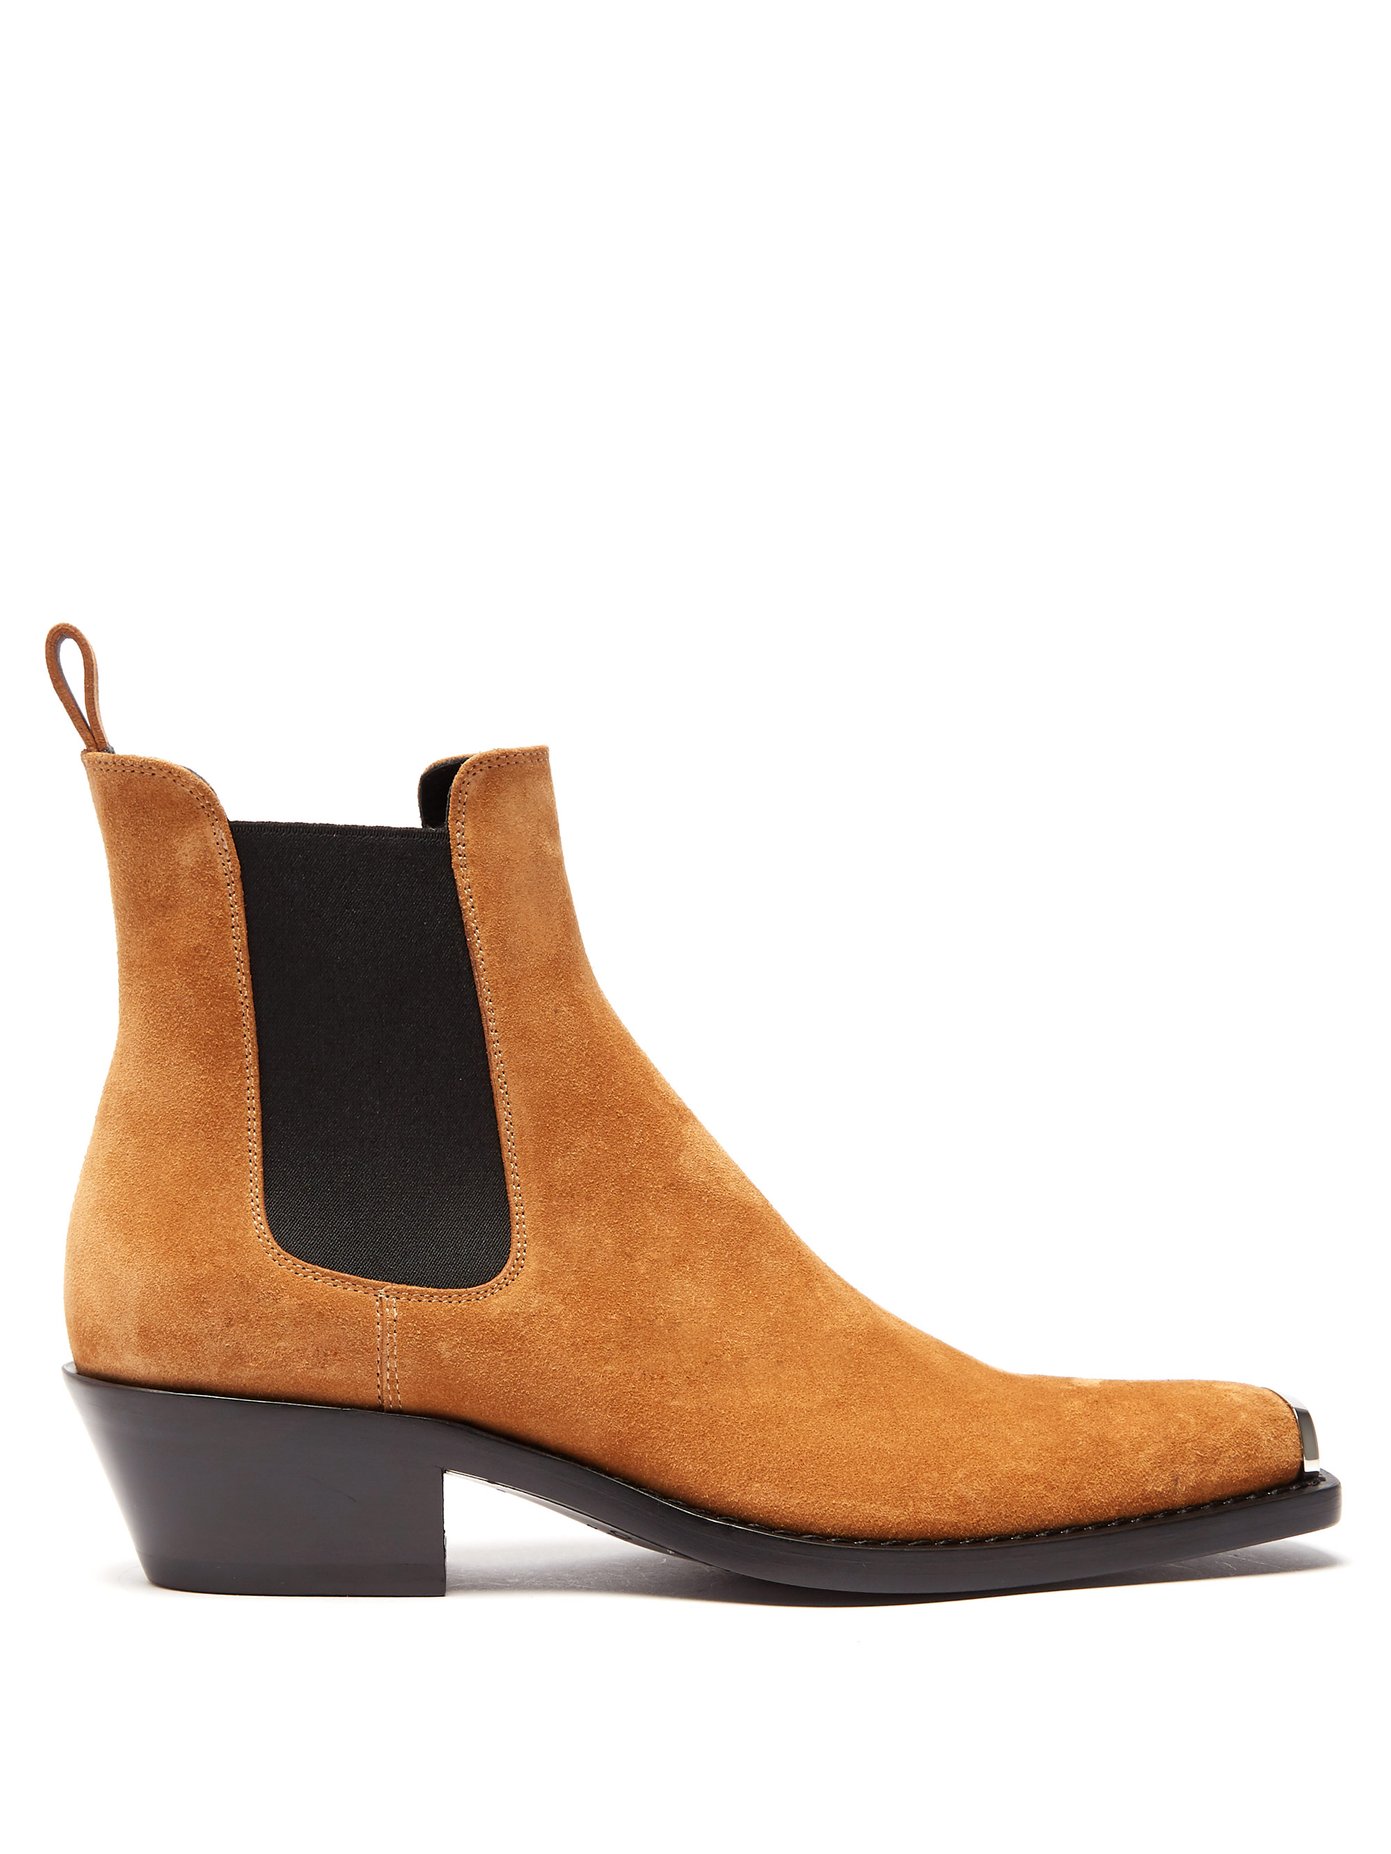 Chris Western suede boots | Calvin 